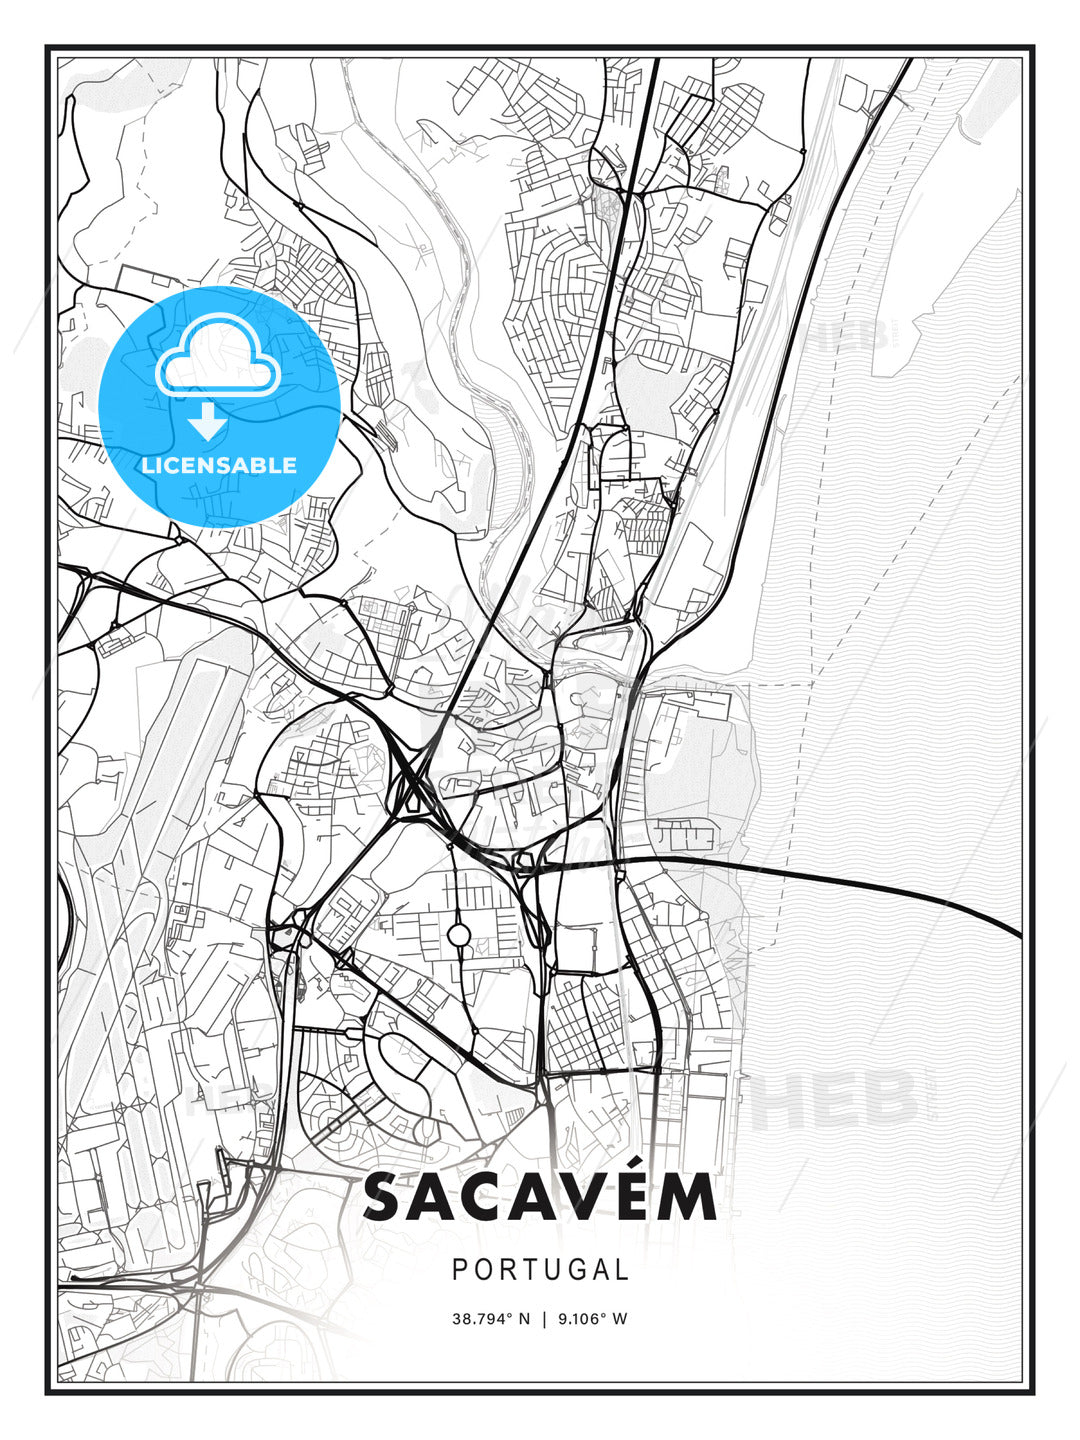 Sacavém, Portugal, Modern Print Template in Various Formats - HEBSTREITS Sketches